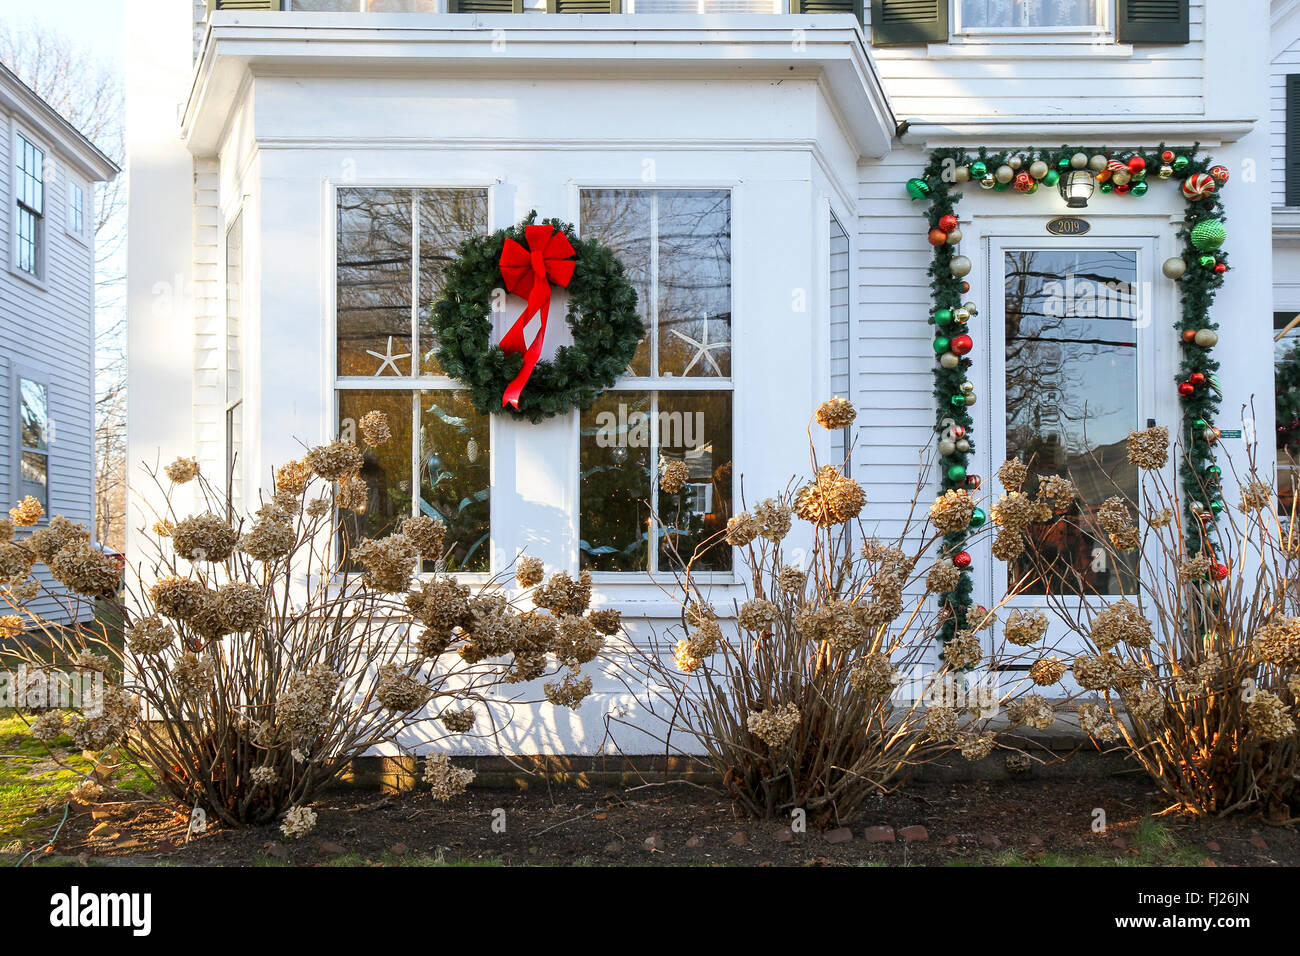 The Bramble Inn Restaurant and Gallery decorated for the Christmas season, Brewster, Cape Cod Stock Photo